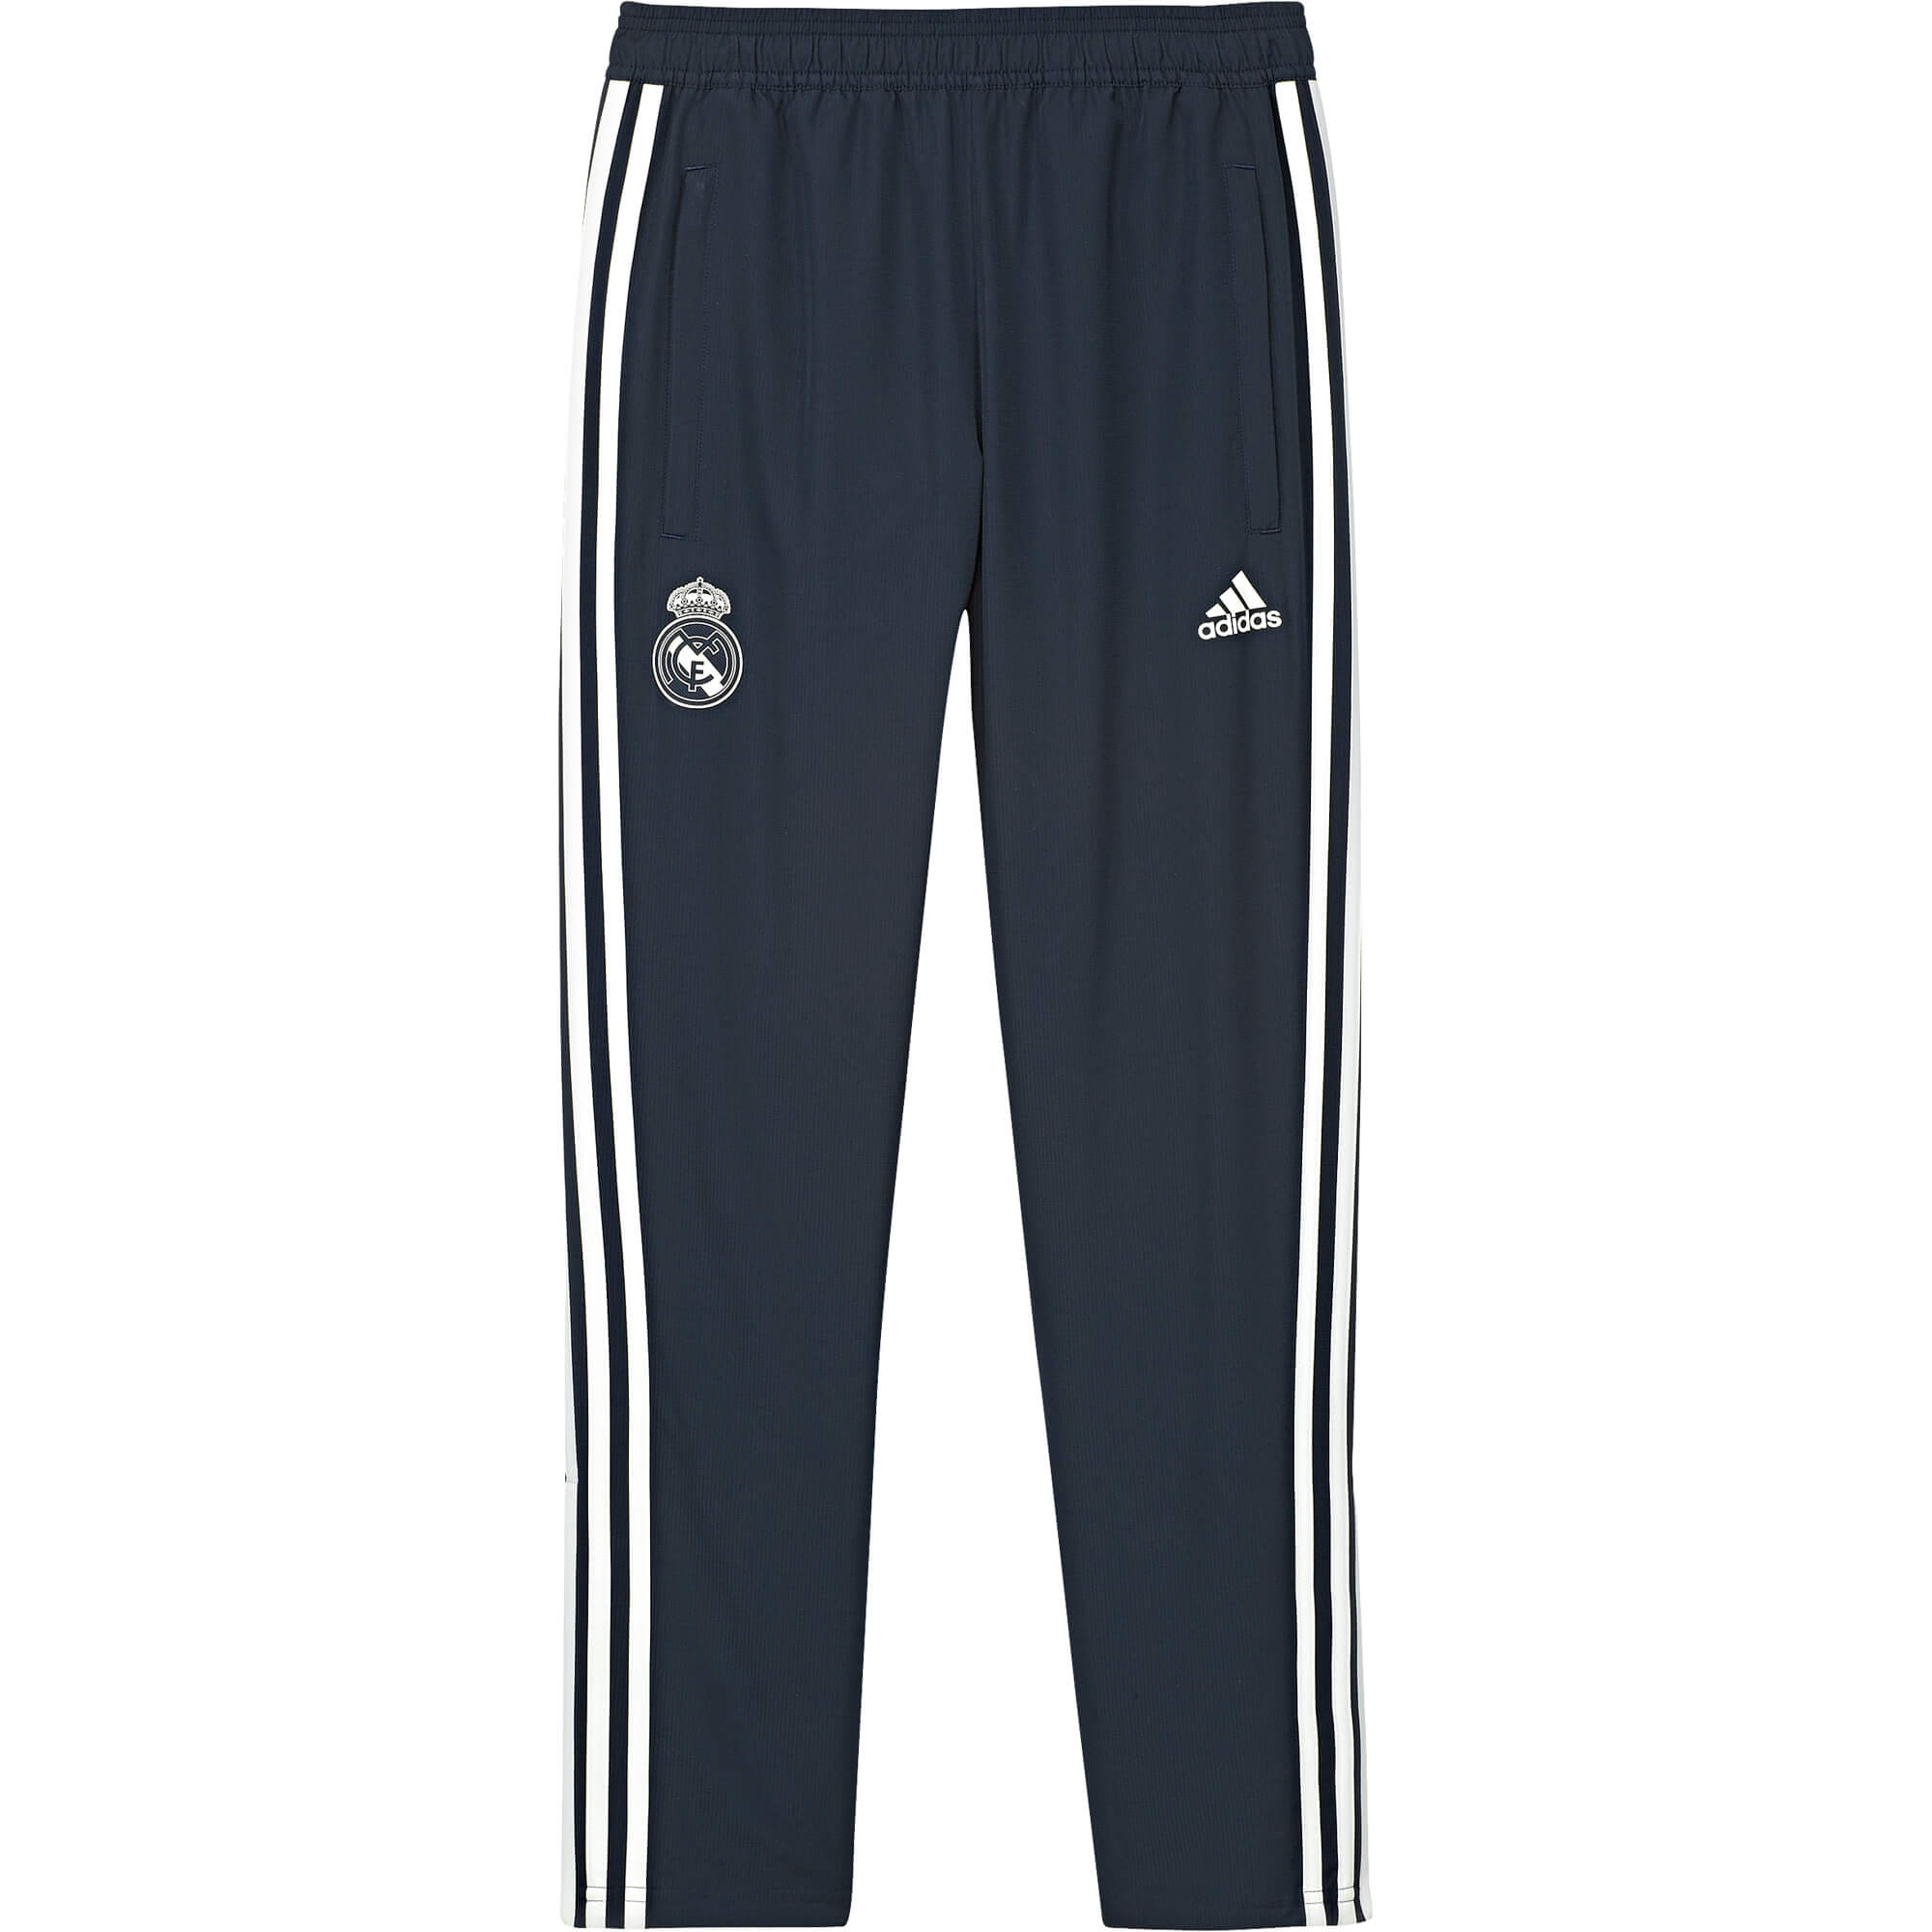 ADIDAS REAL MADRID WOVEN PANT JUNIOR GRIS 2018/2019